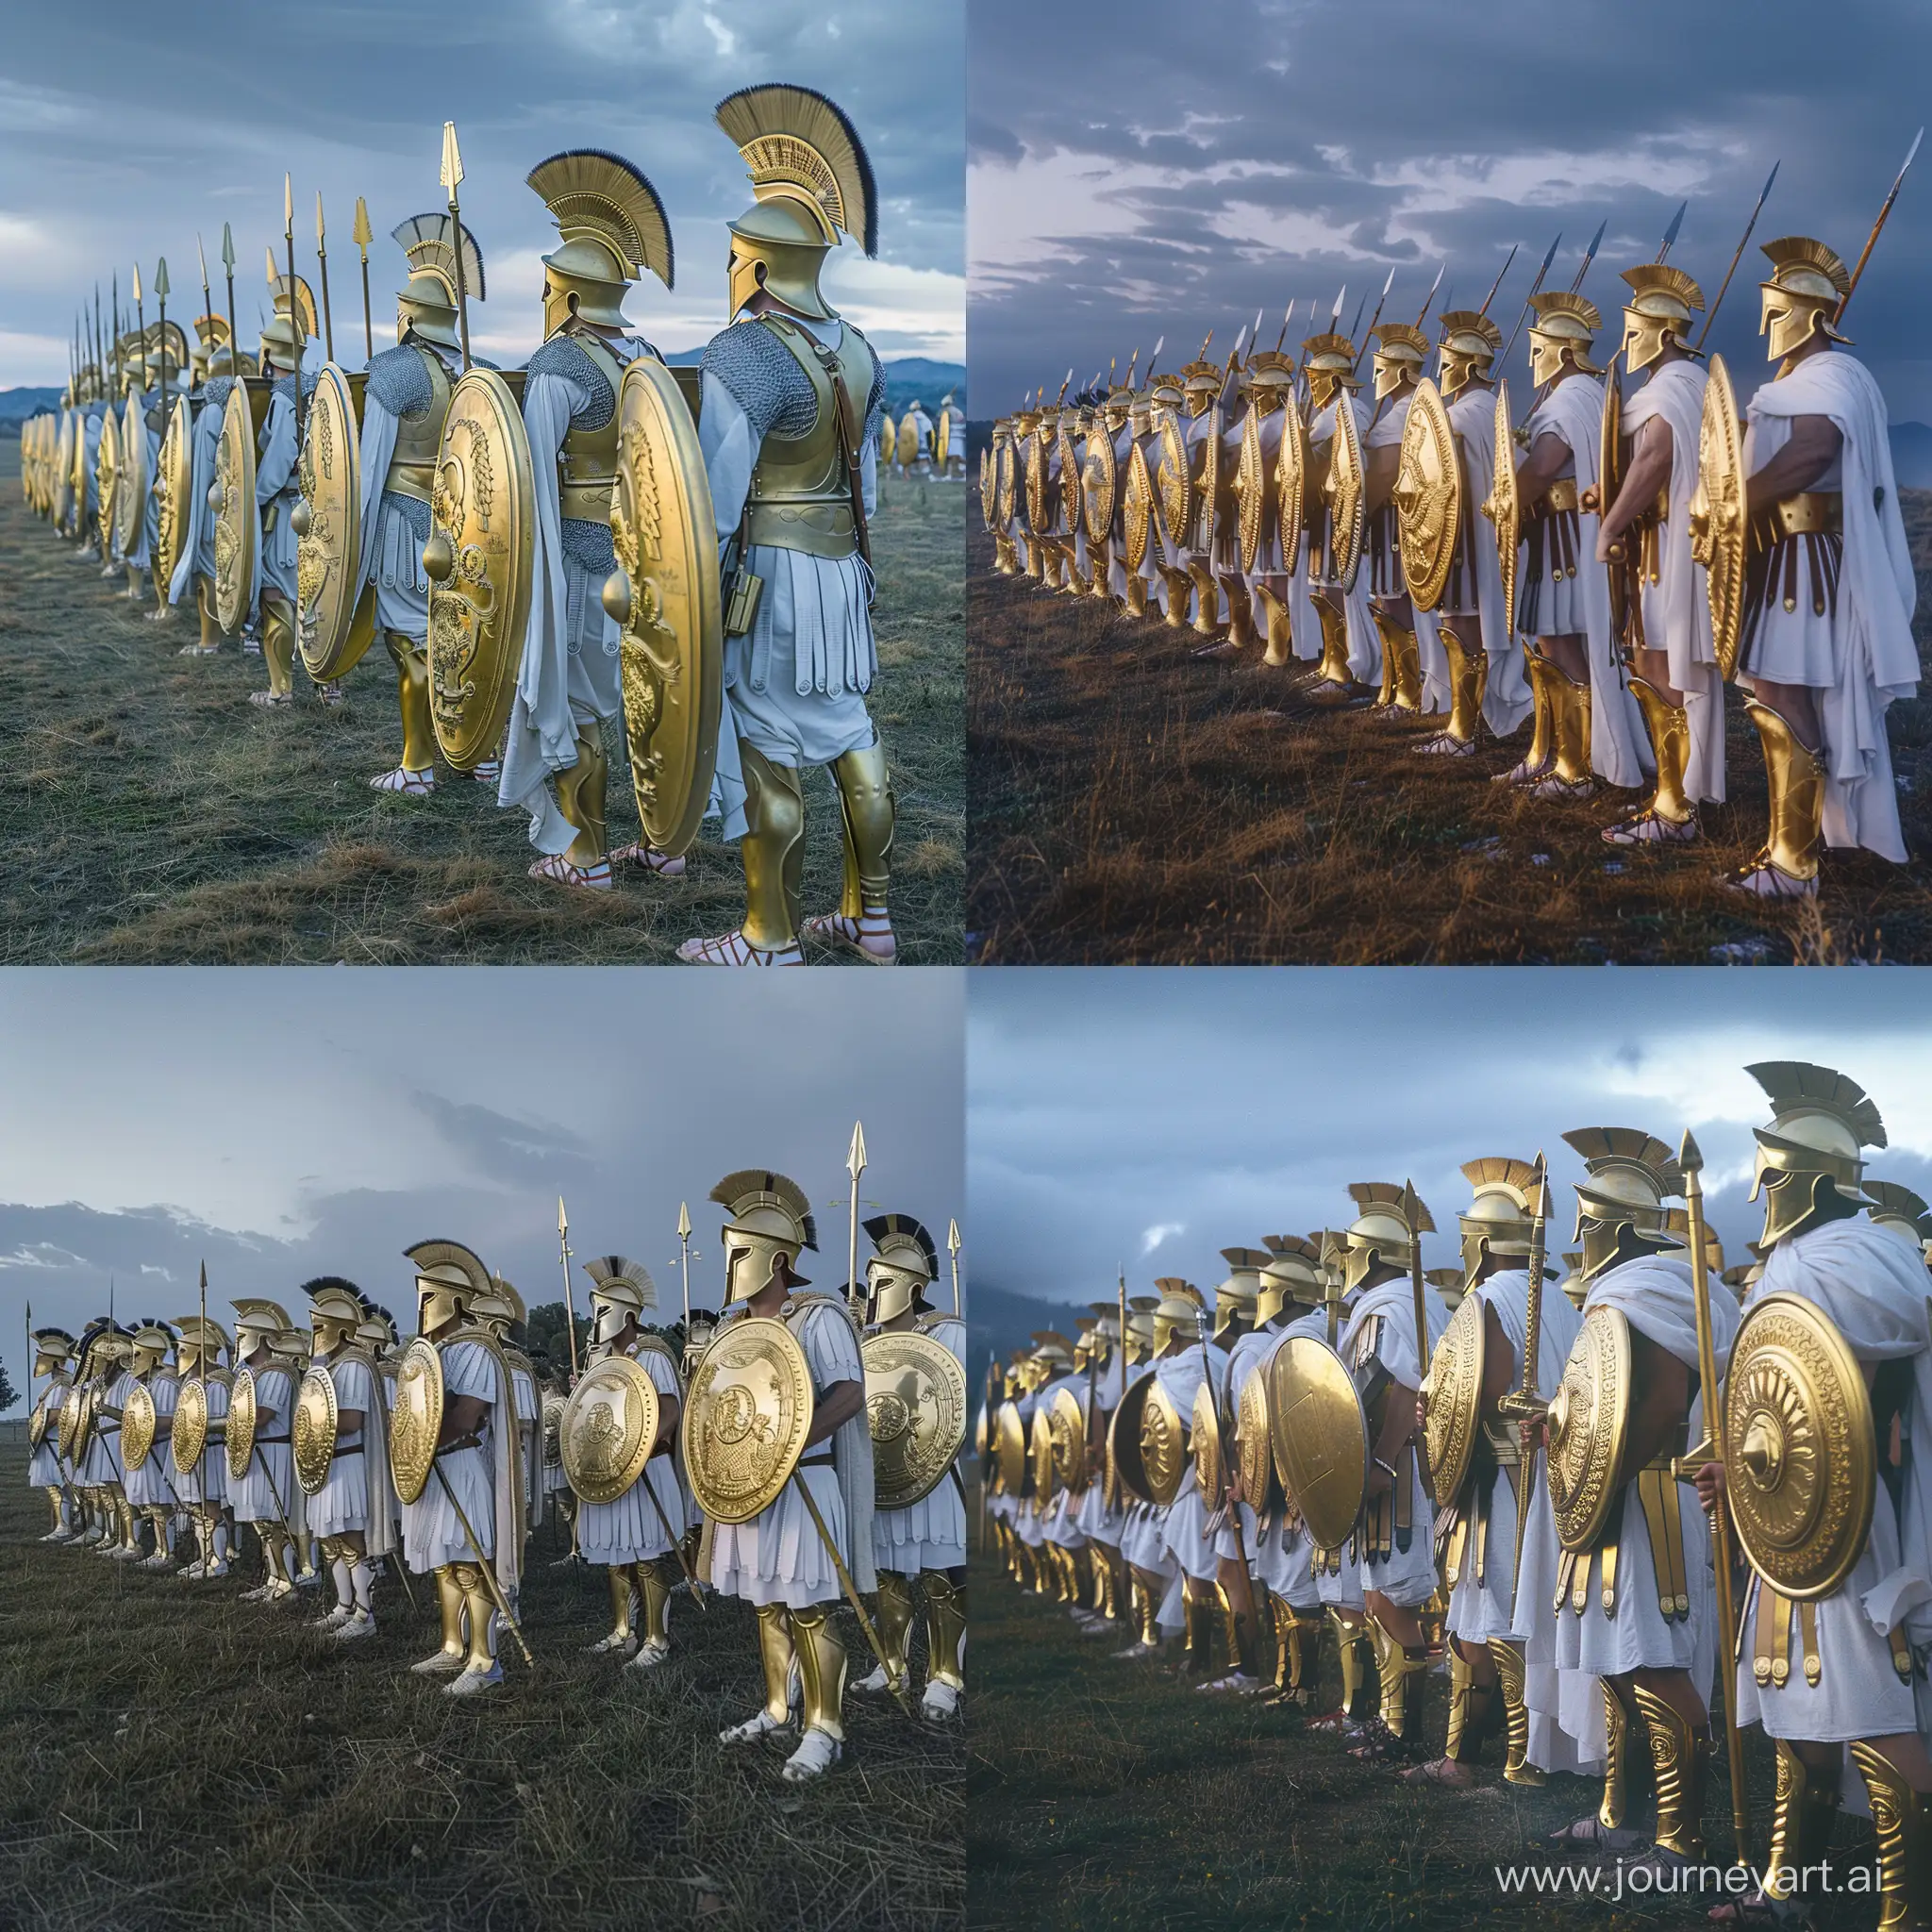 Soldiers line up in Testudo formation,  open field at dusk, white and gold armor, gold swords, golden shields, and Spartan helmets.